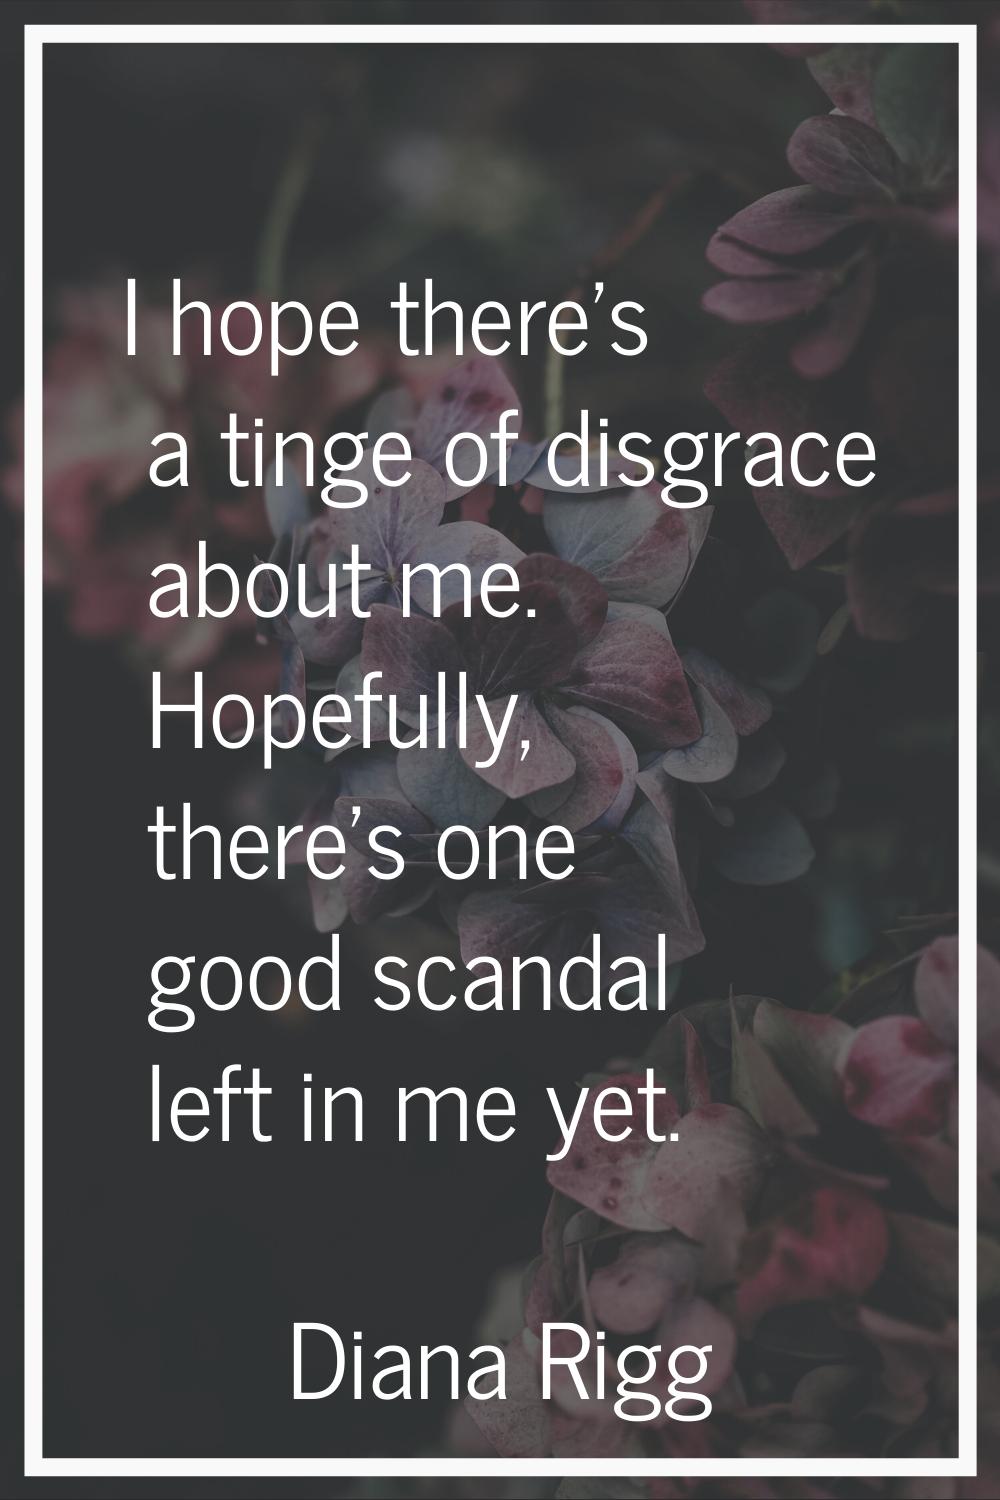 I hope there's a tinge of disgrace about me. Hopefully, there's one good scandal left in me yet.